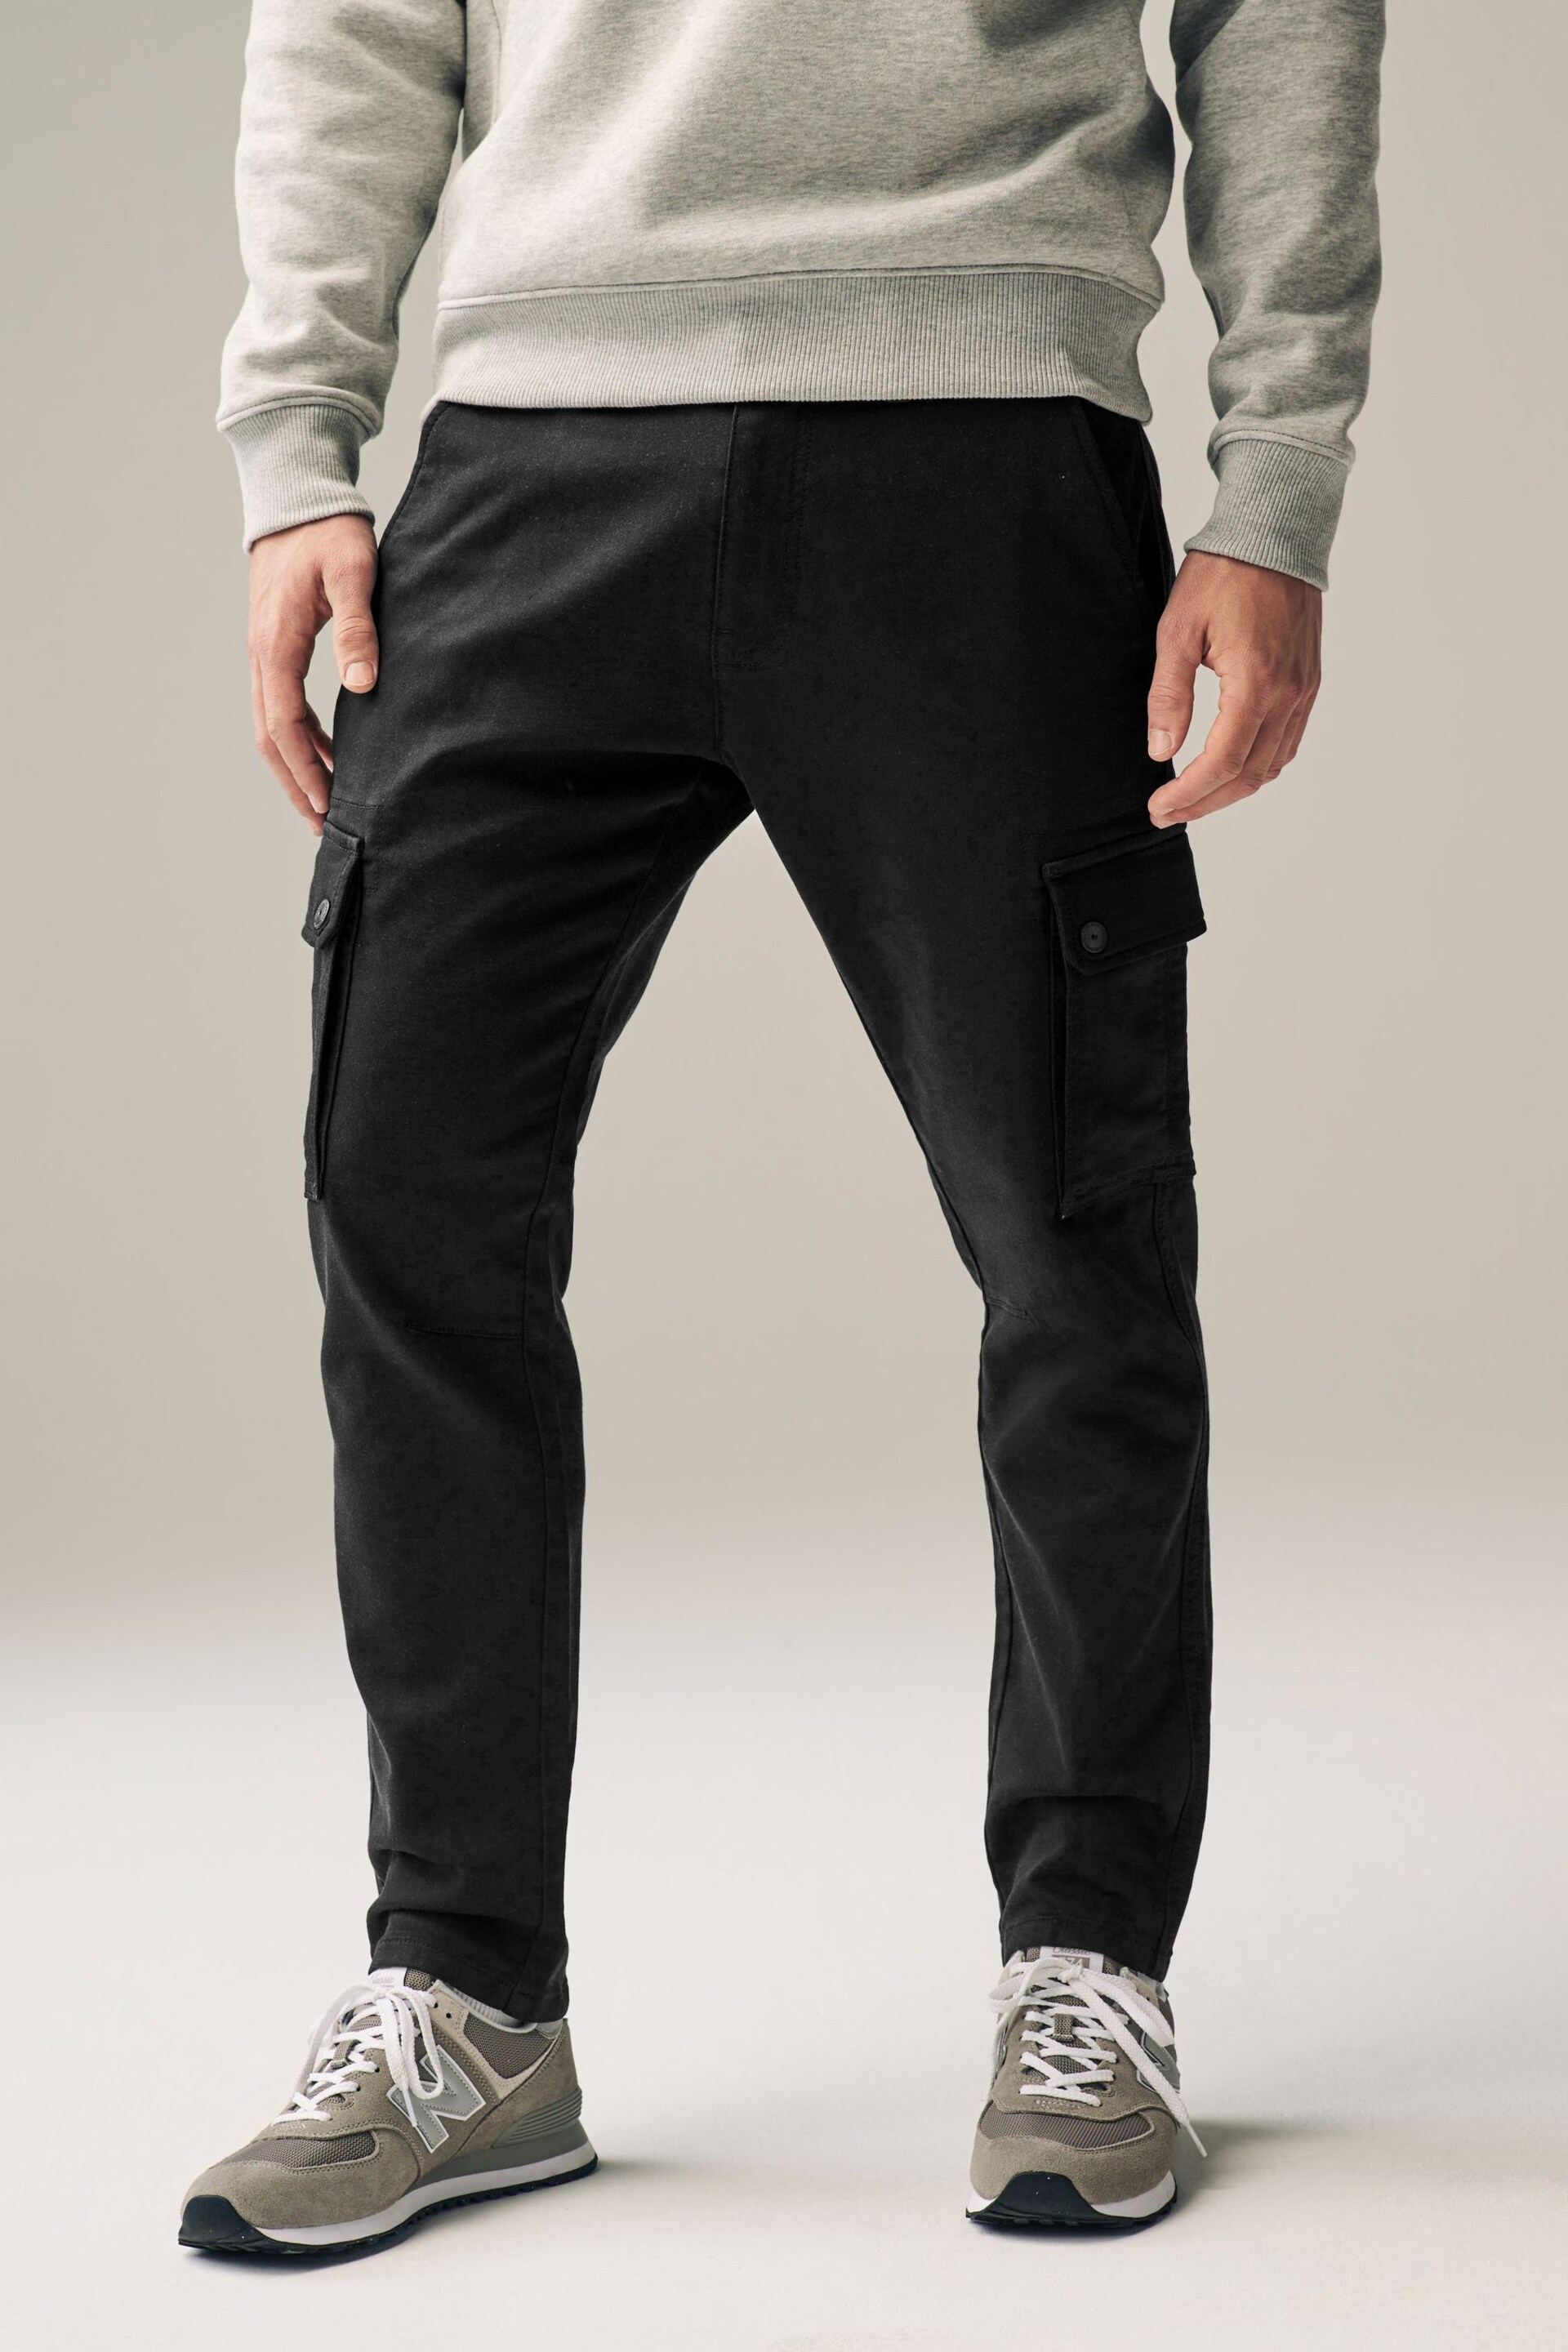 Black Motionflex Cargo Trousers - Image 1 of 10